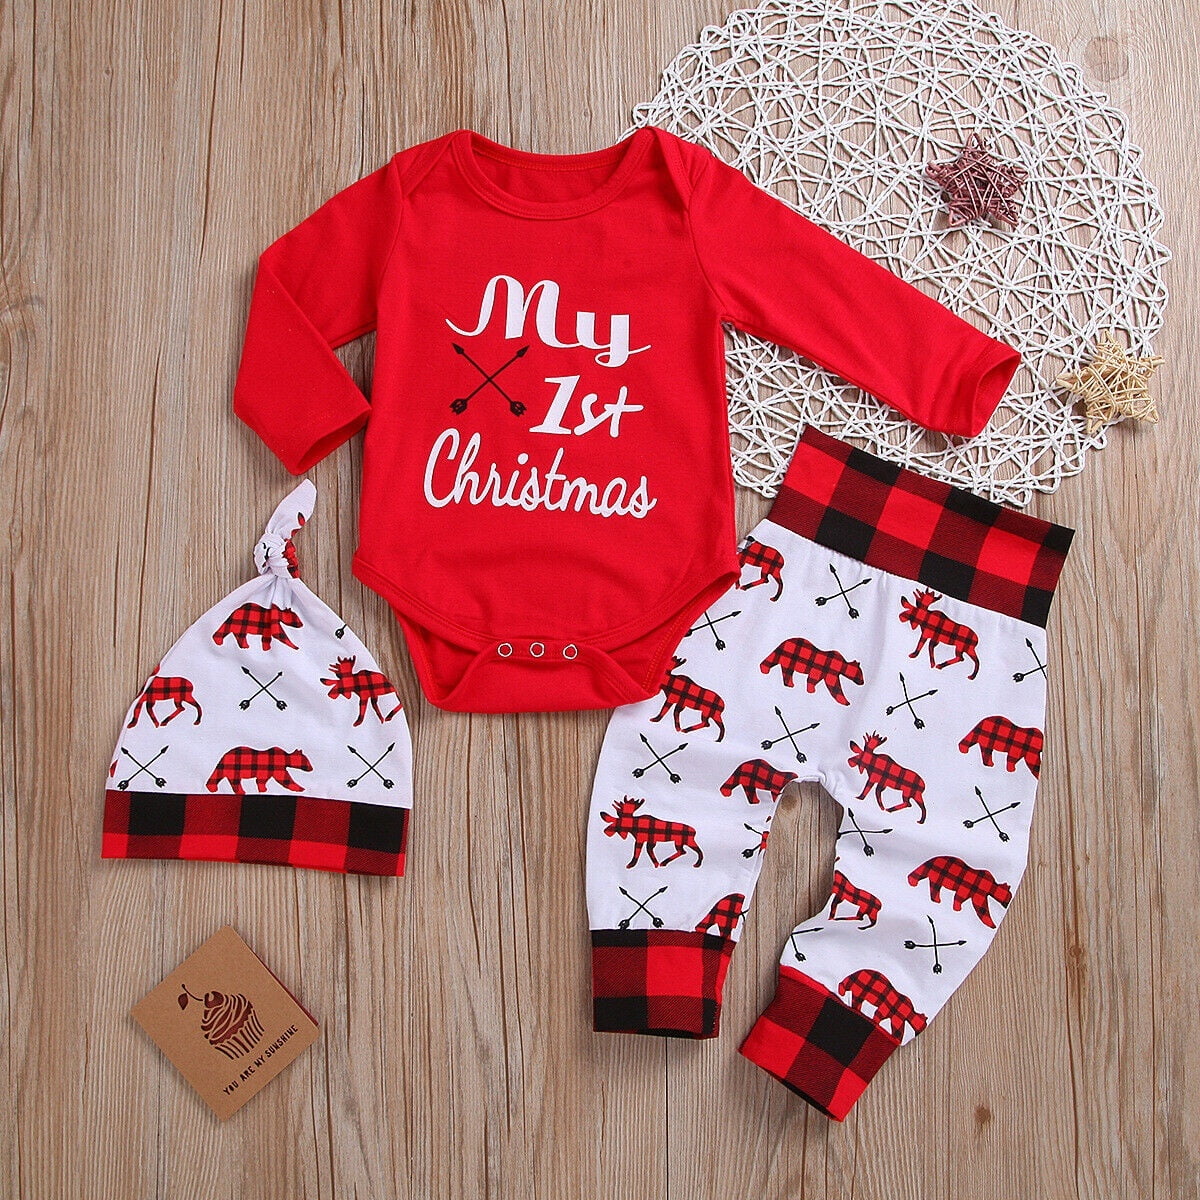 My 1st Christmas Baby Boy Girl Newborn Xmas Clothes Romper+Pants+Hat Clothes  3PCS Christmas Outfits Set | Walmart Canada